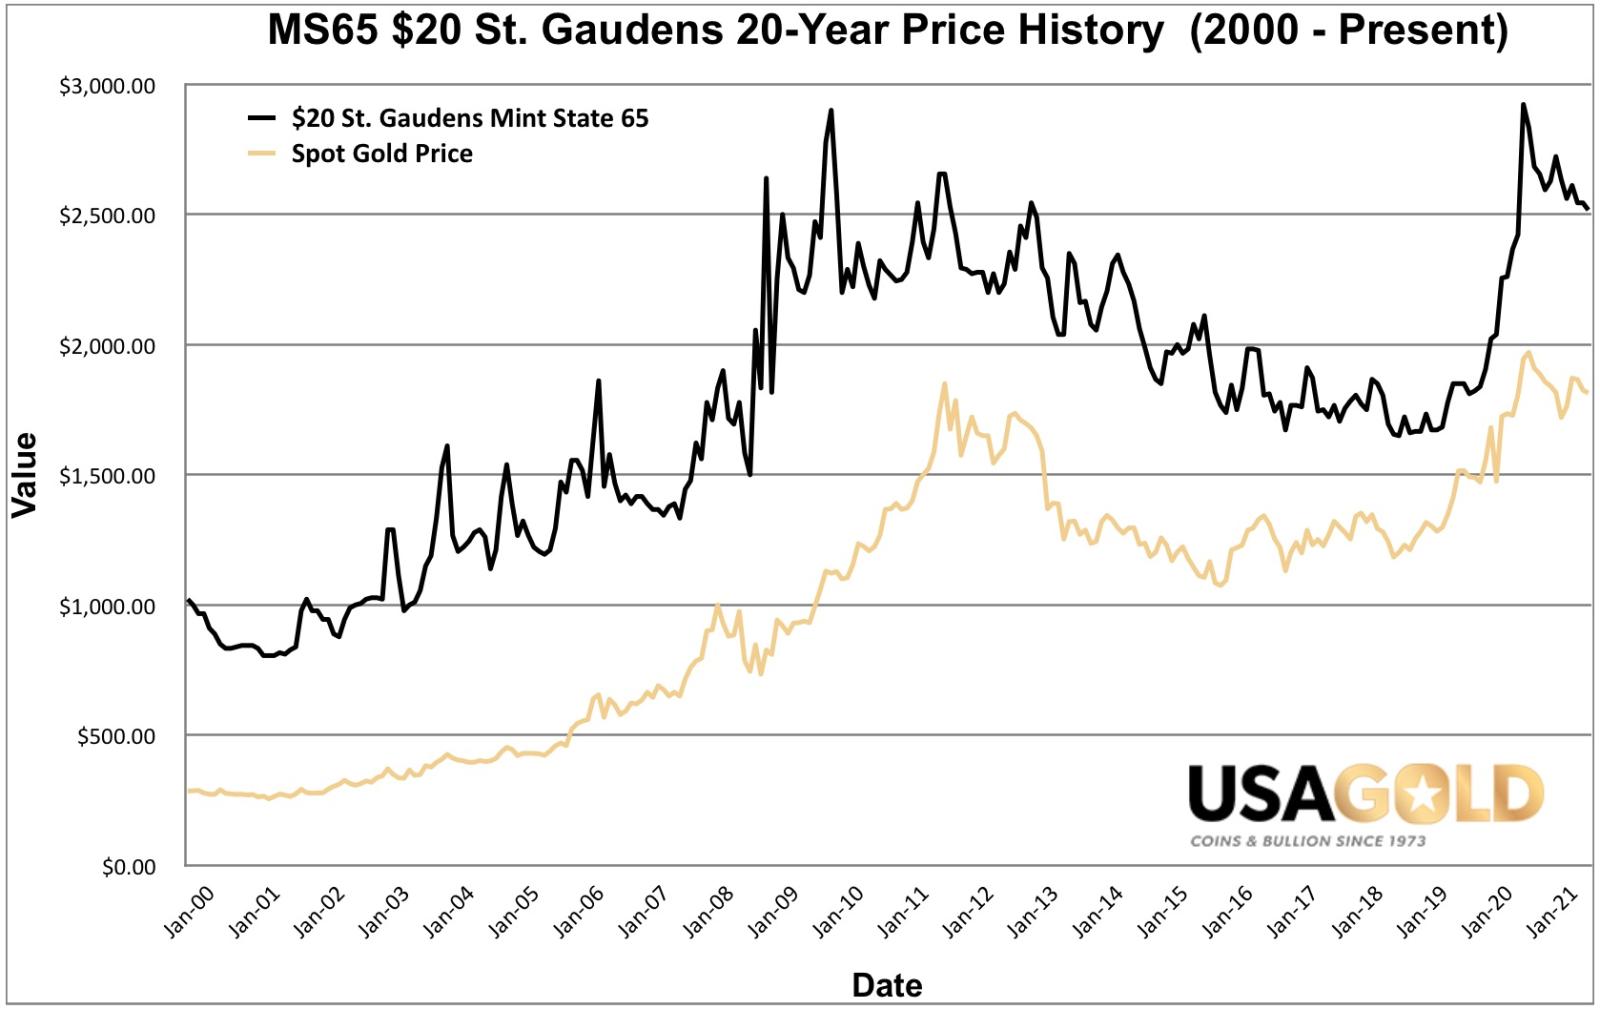 Graph of the price history of MS65 $20 St. Gaudens since year 2000. Graph includes the spot price of gold over the same period.